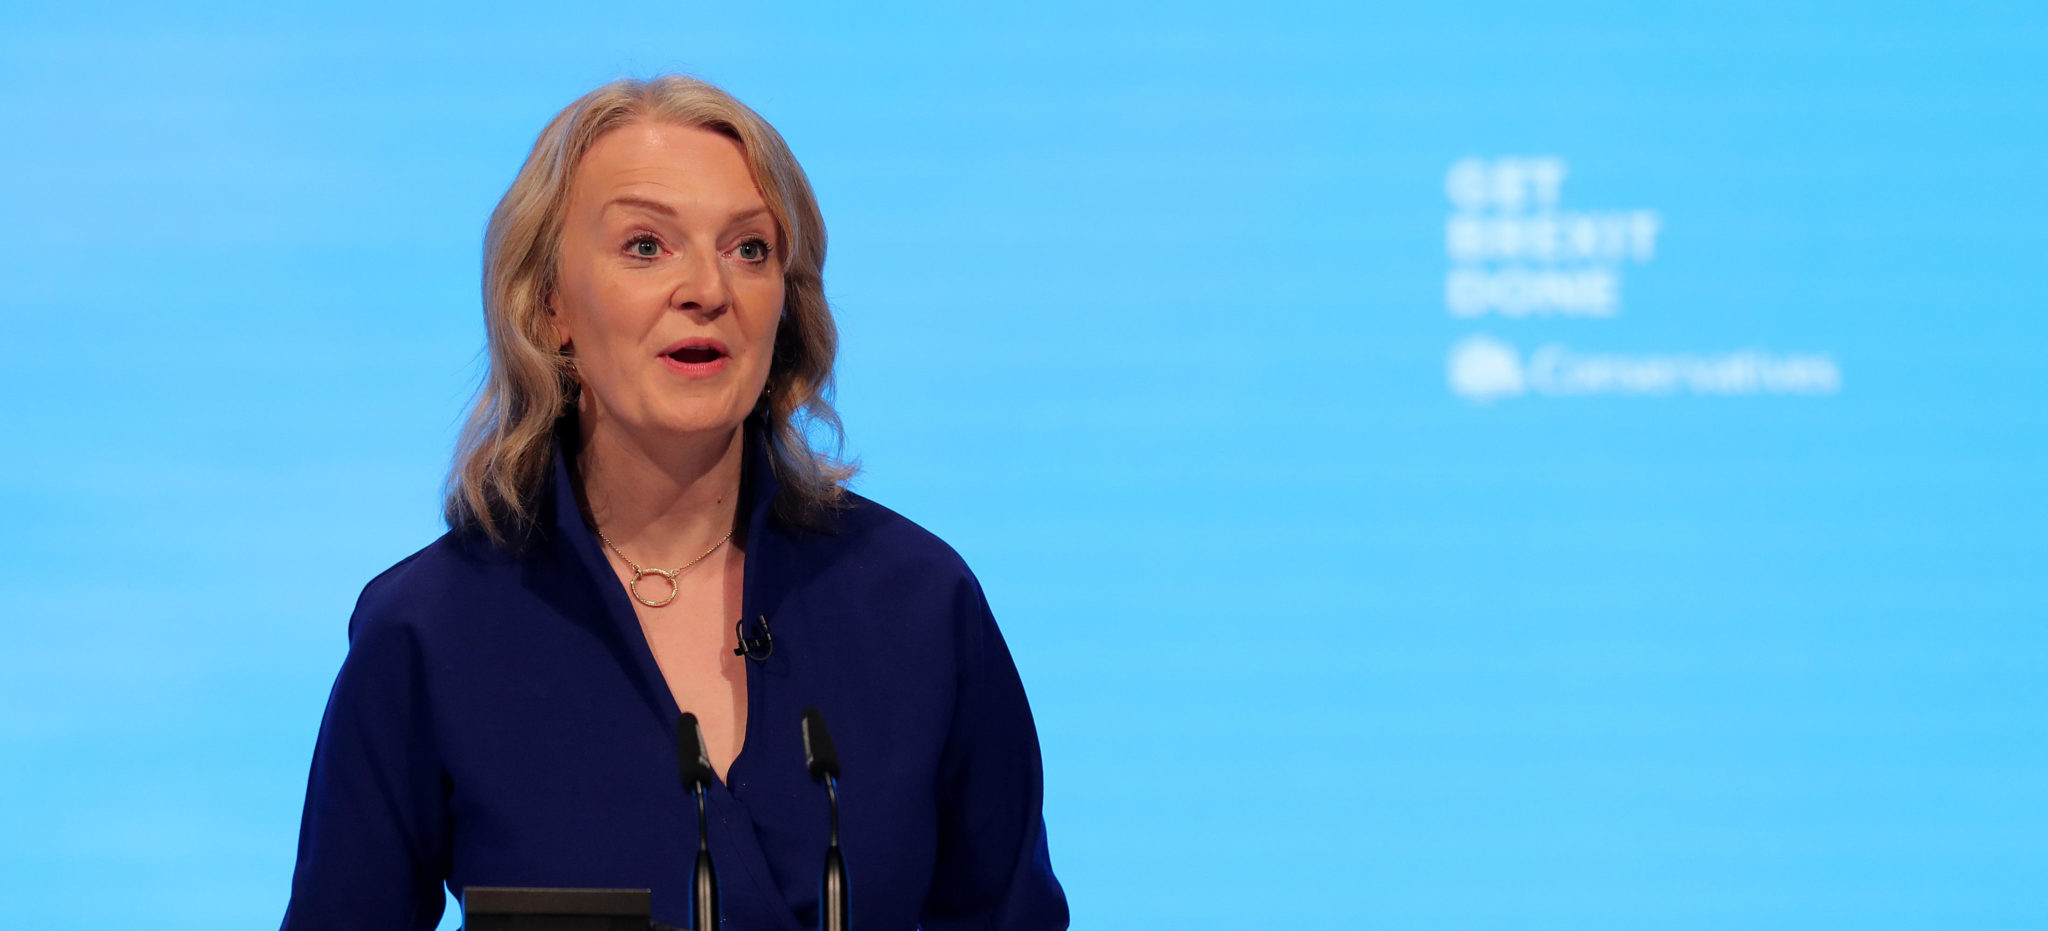 British Minister Liz Truss is seen addressing a Conservative Party conference in Manchester, England in September 2019.